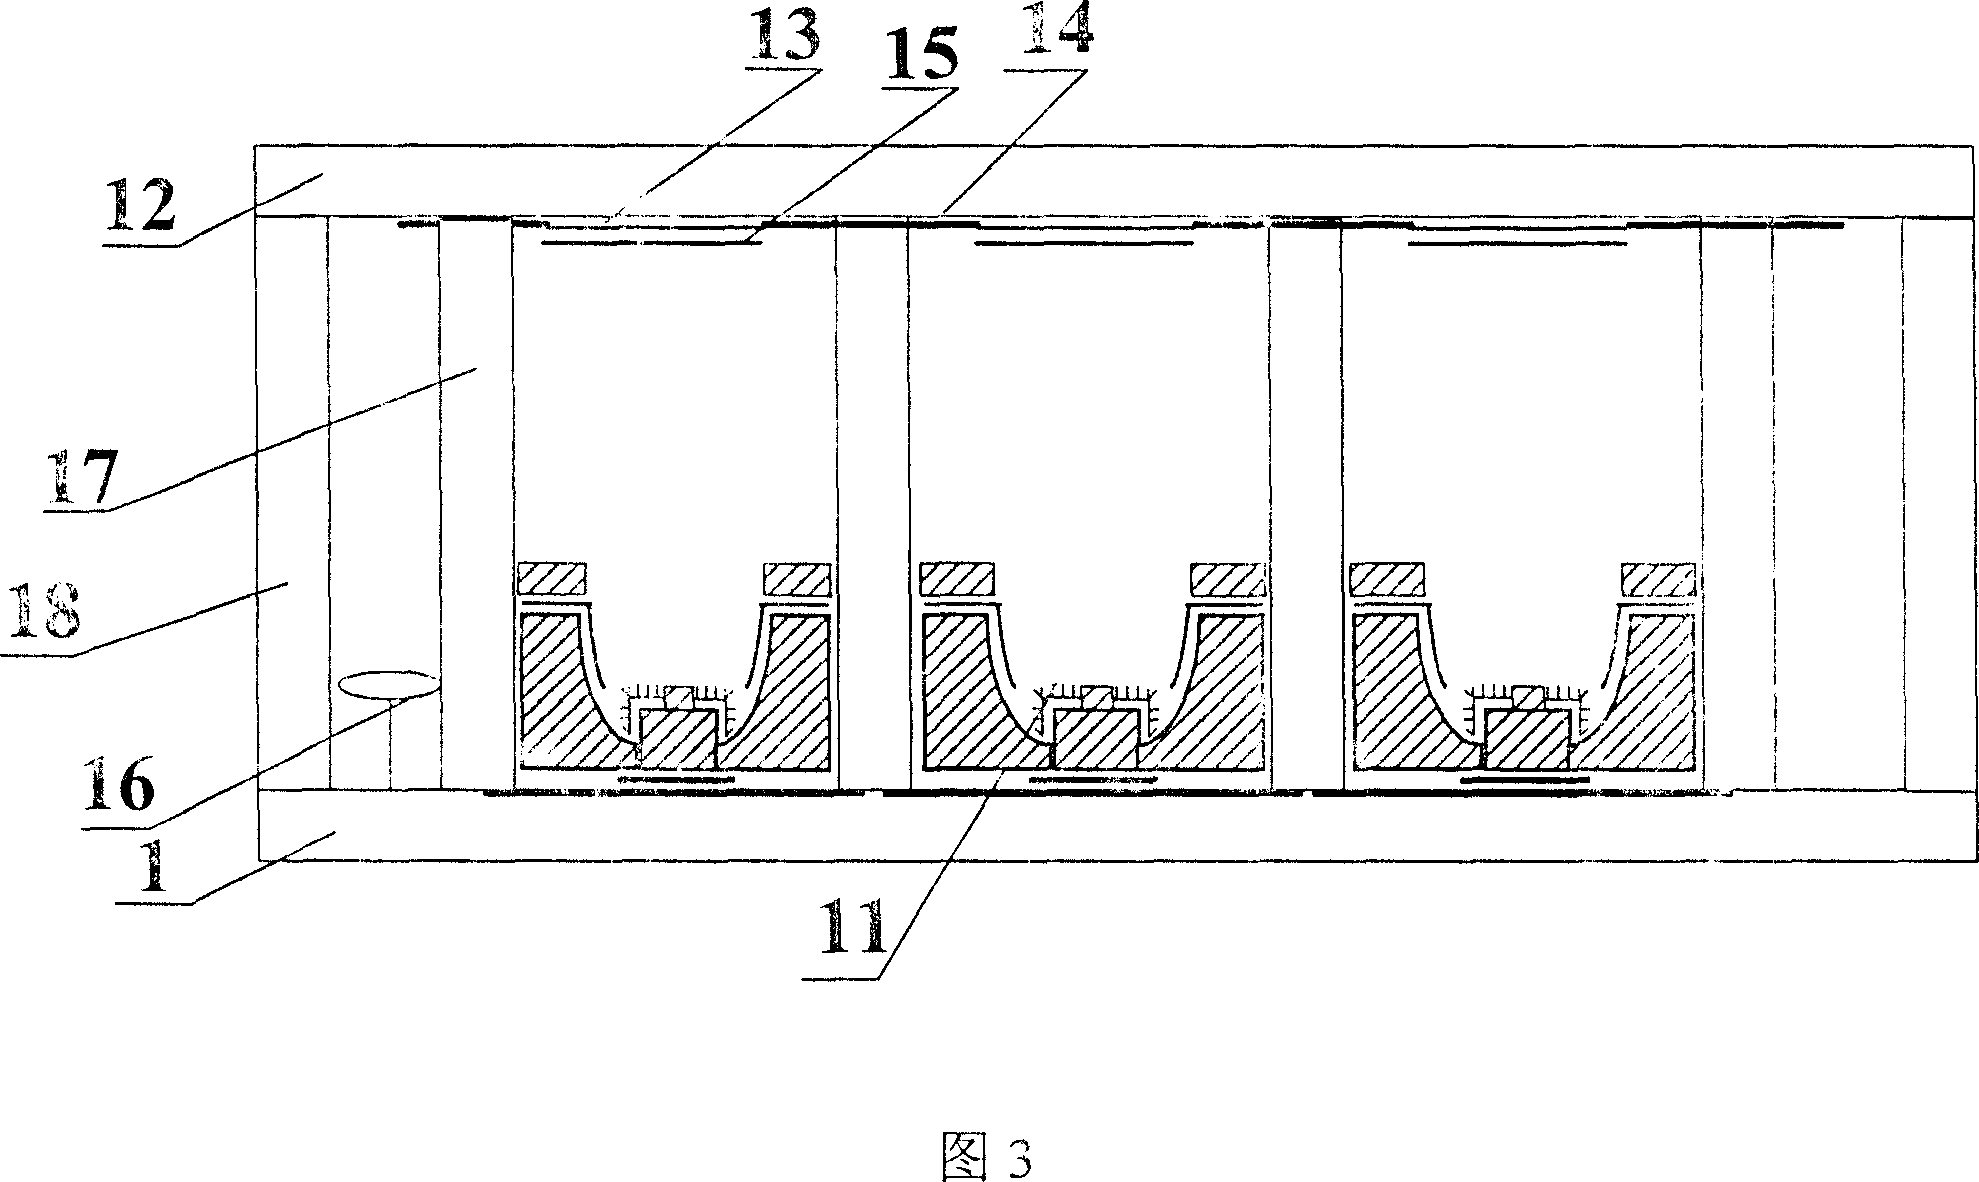 Flat-board display of arc-shape grid controlled array structure and mfg. process